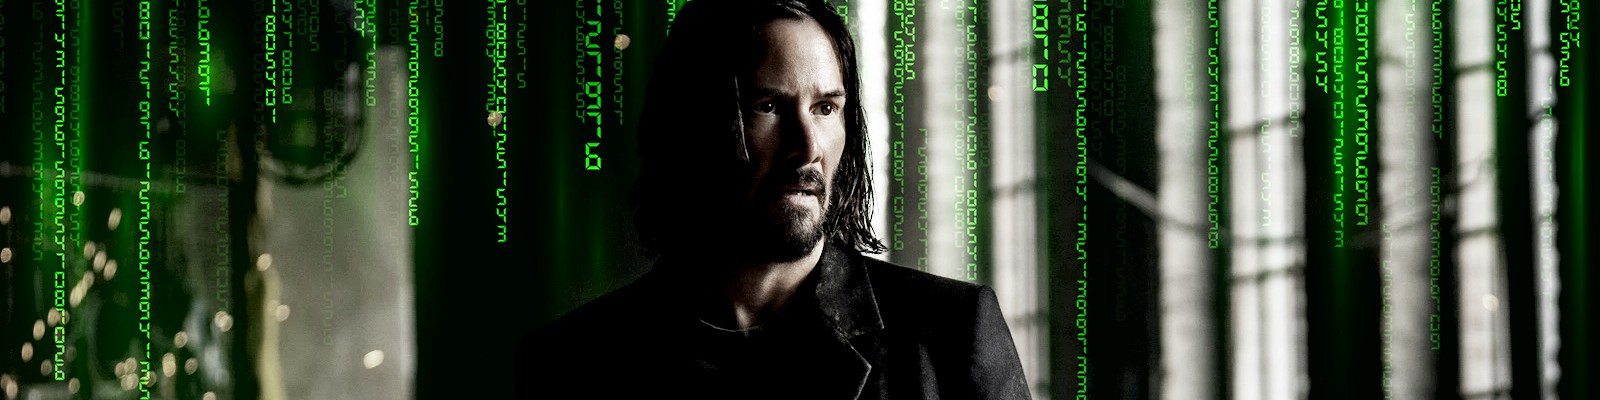 Keanu Reeves On ‘The Matrix Resurrections,’ The Theory Of Living In A Simulation, And The Co-Opting Of ‘Red Pill’